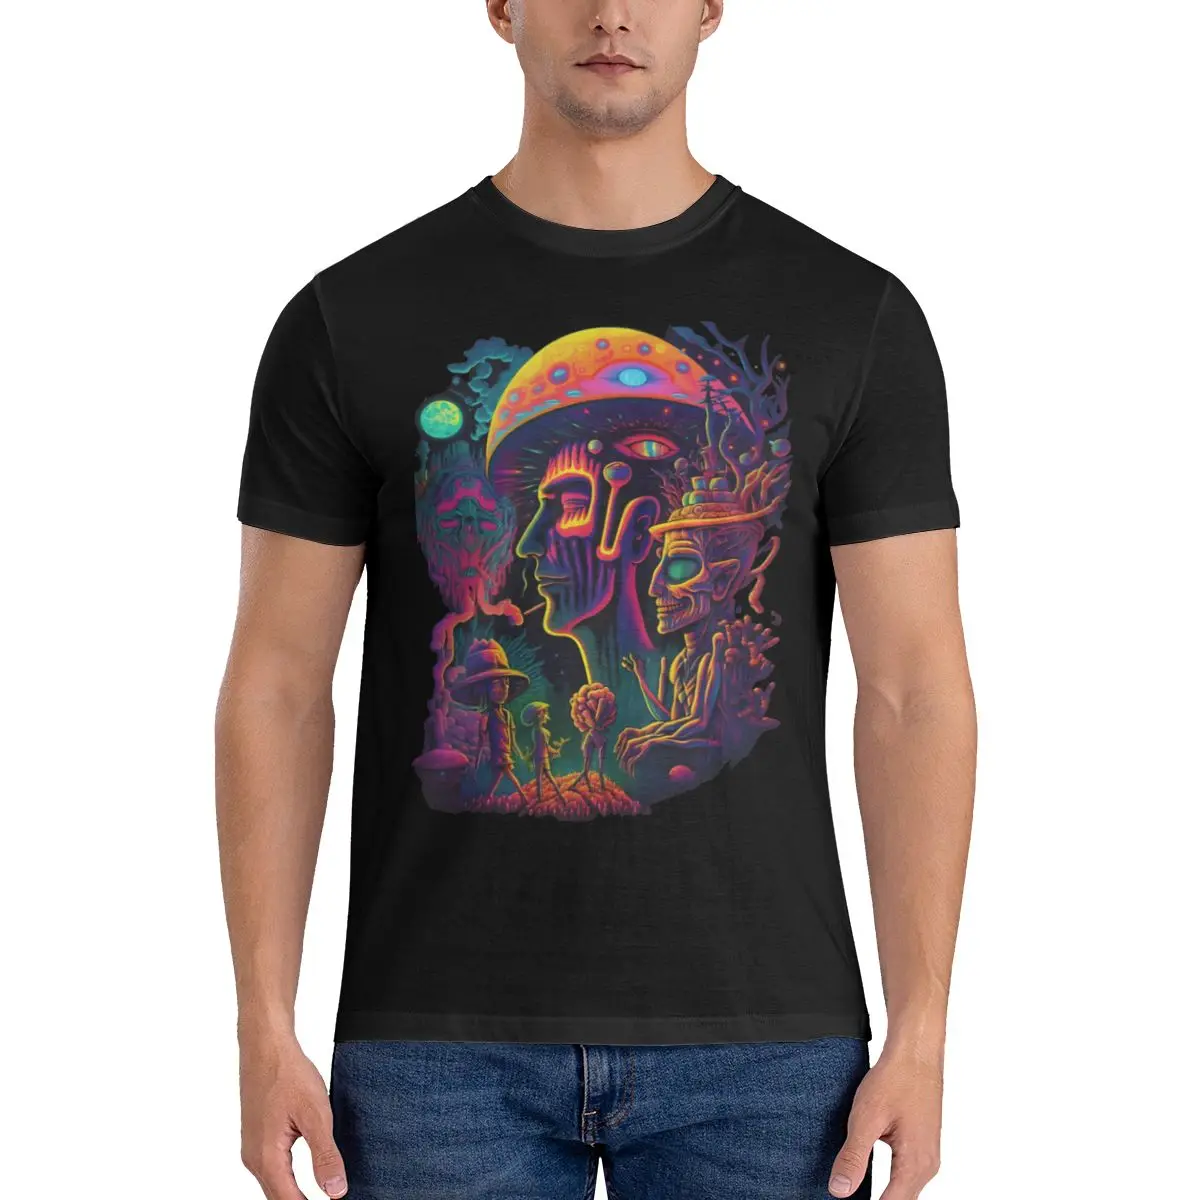 

Hipster Trippy Psychedelic T-Shirts for Men Round Collar Pure Cotton T Shirt Mushroom Short Sleeve Tees Gift Idea Tops